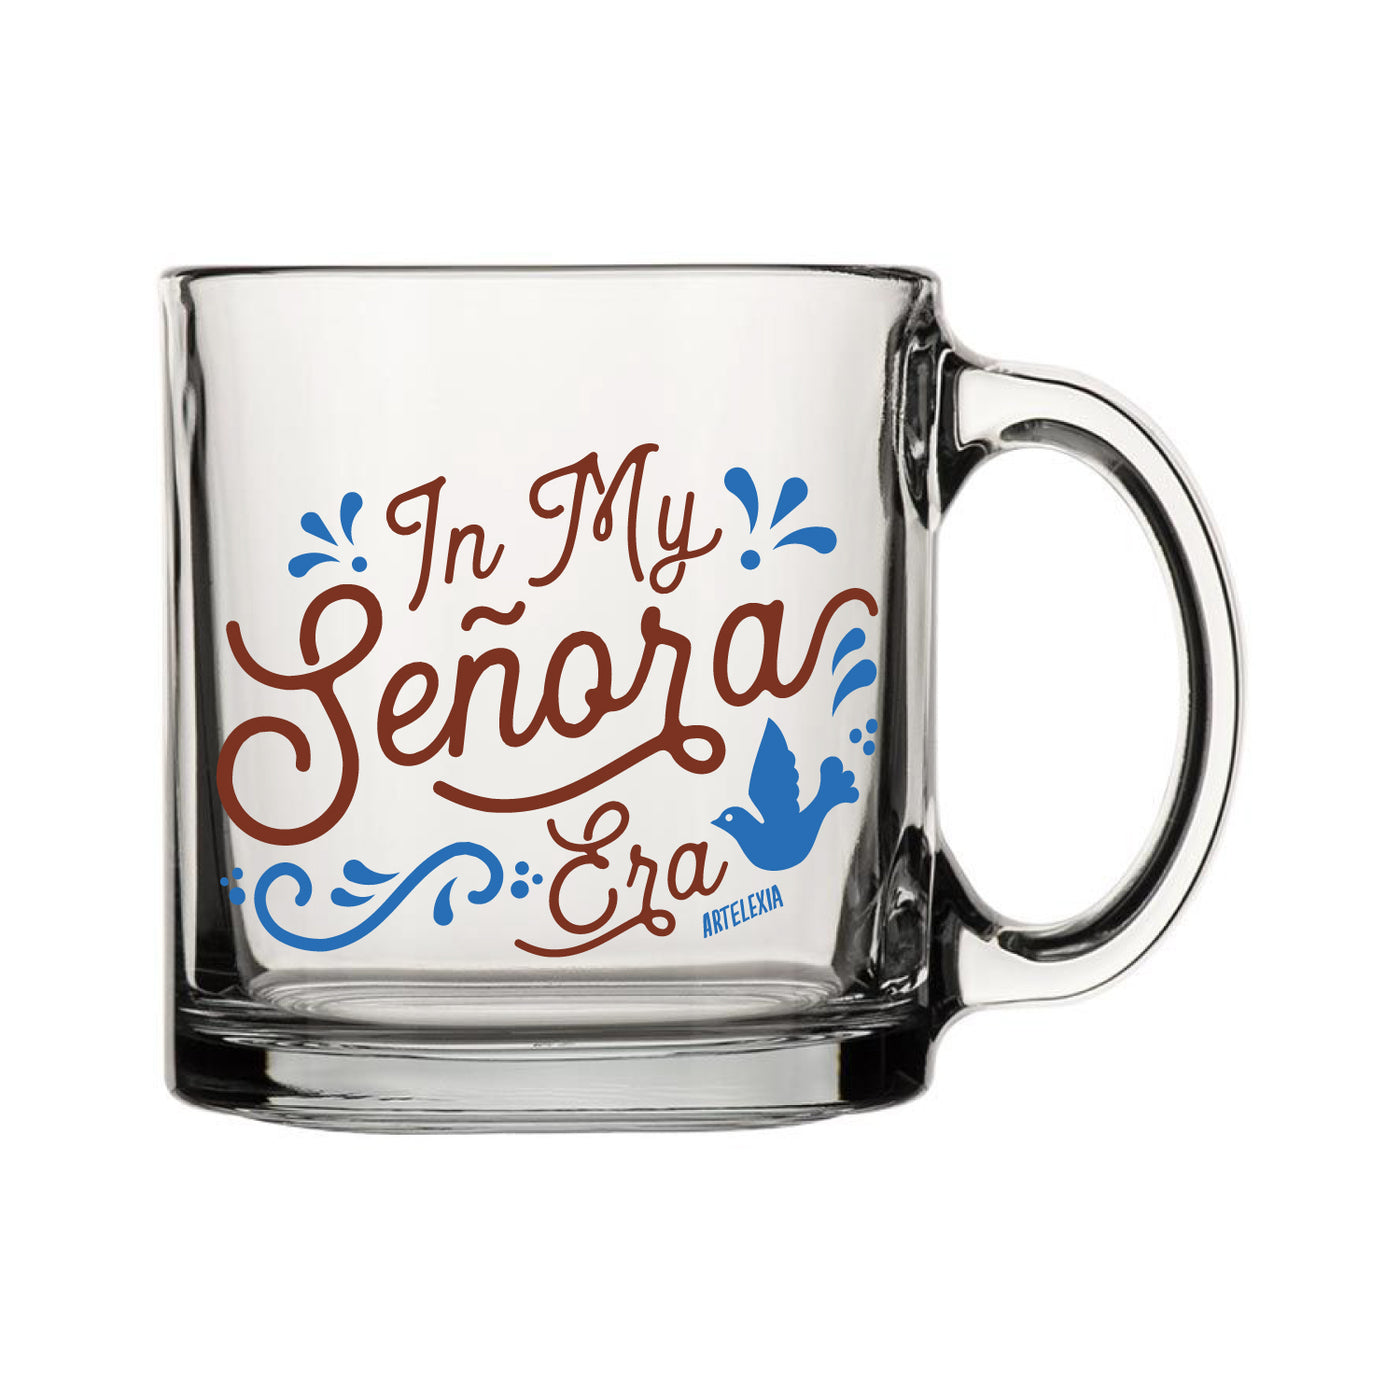 Clear glass mug with the phrase In My Senora Era in brown lettering and blue filagree